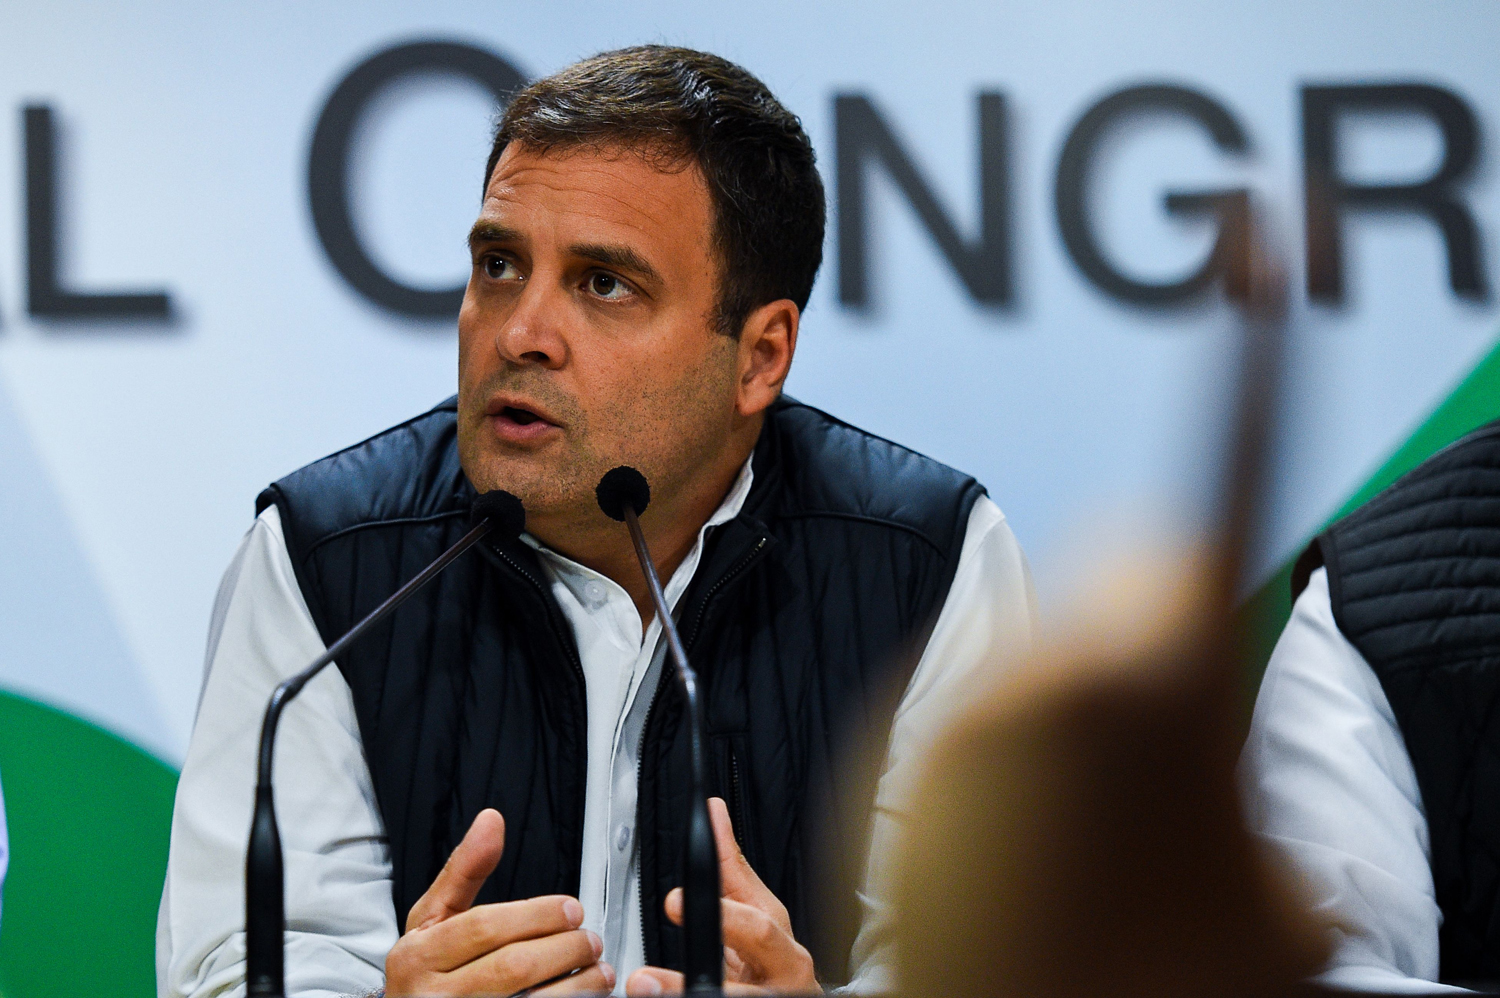 Victor Rahul is a reflection of Modi, not a leader in his own right